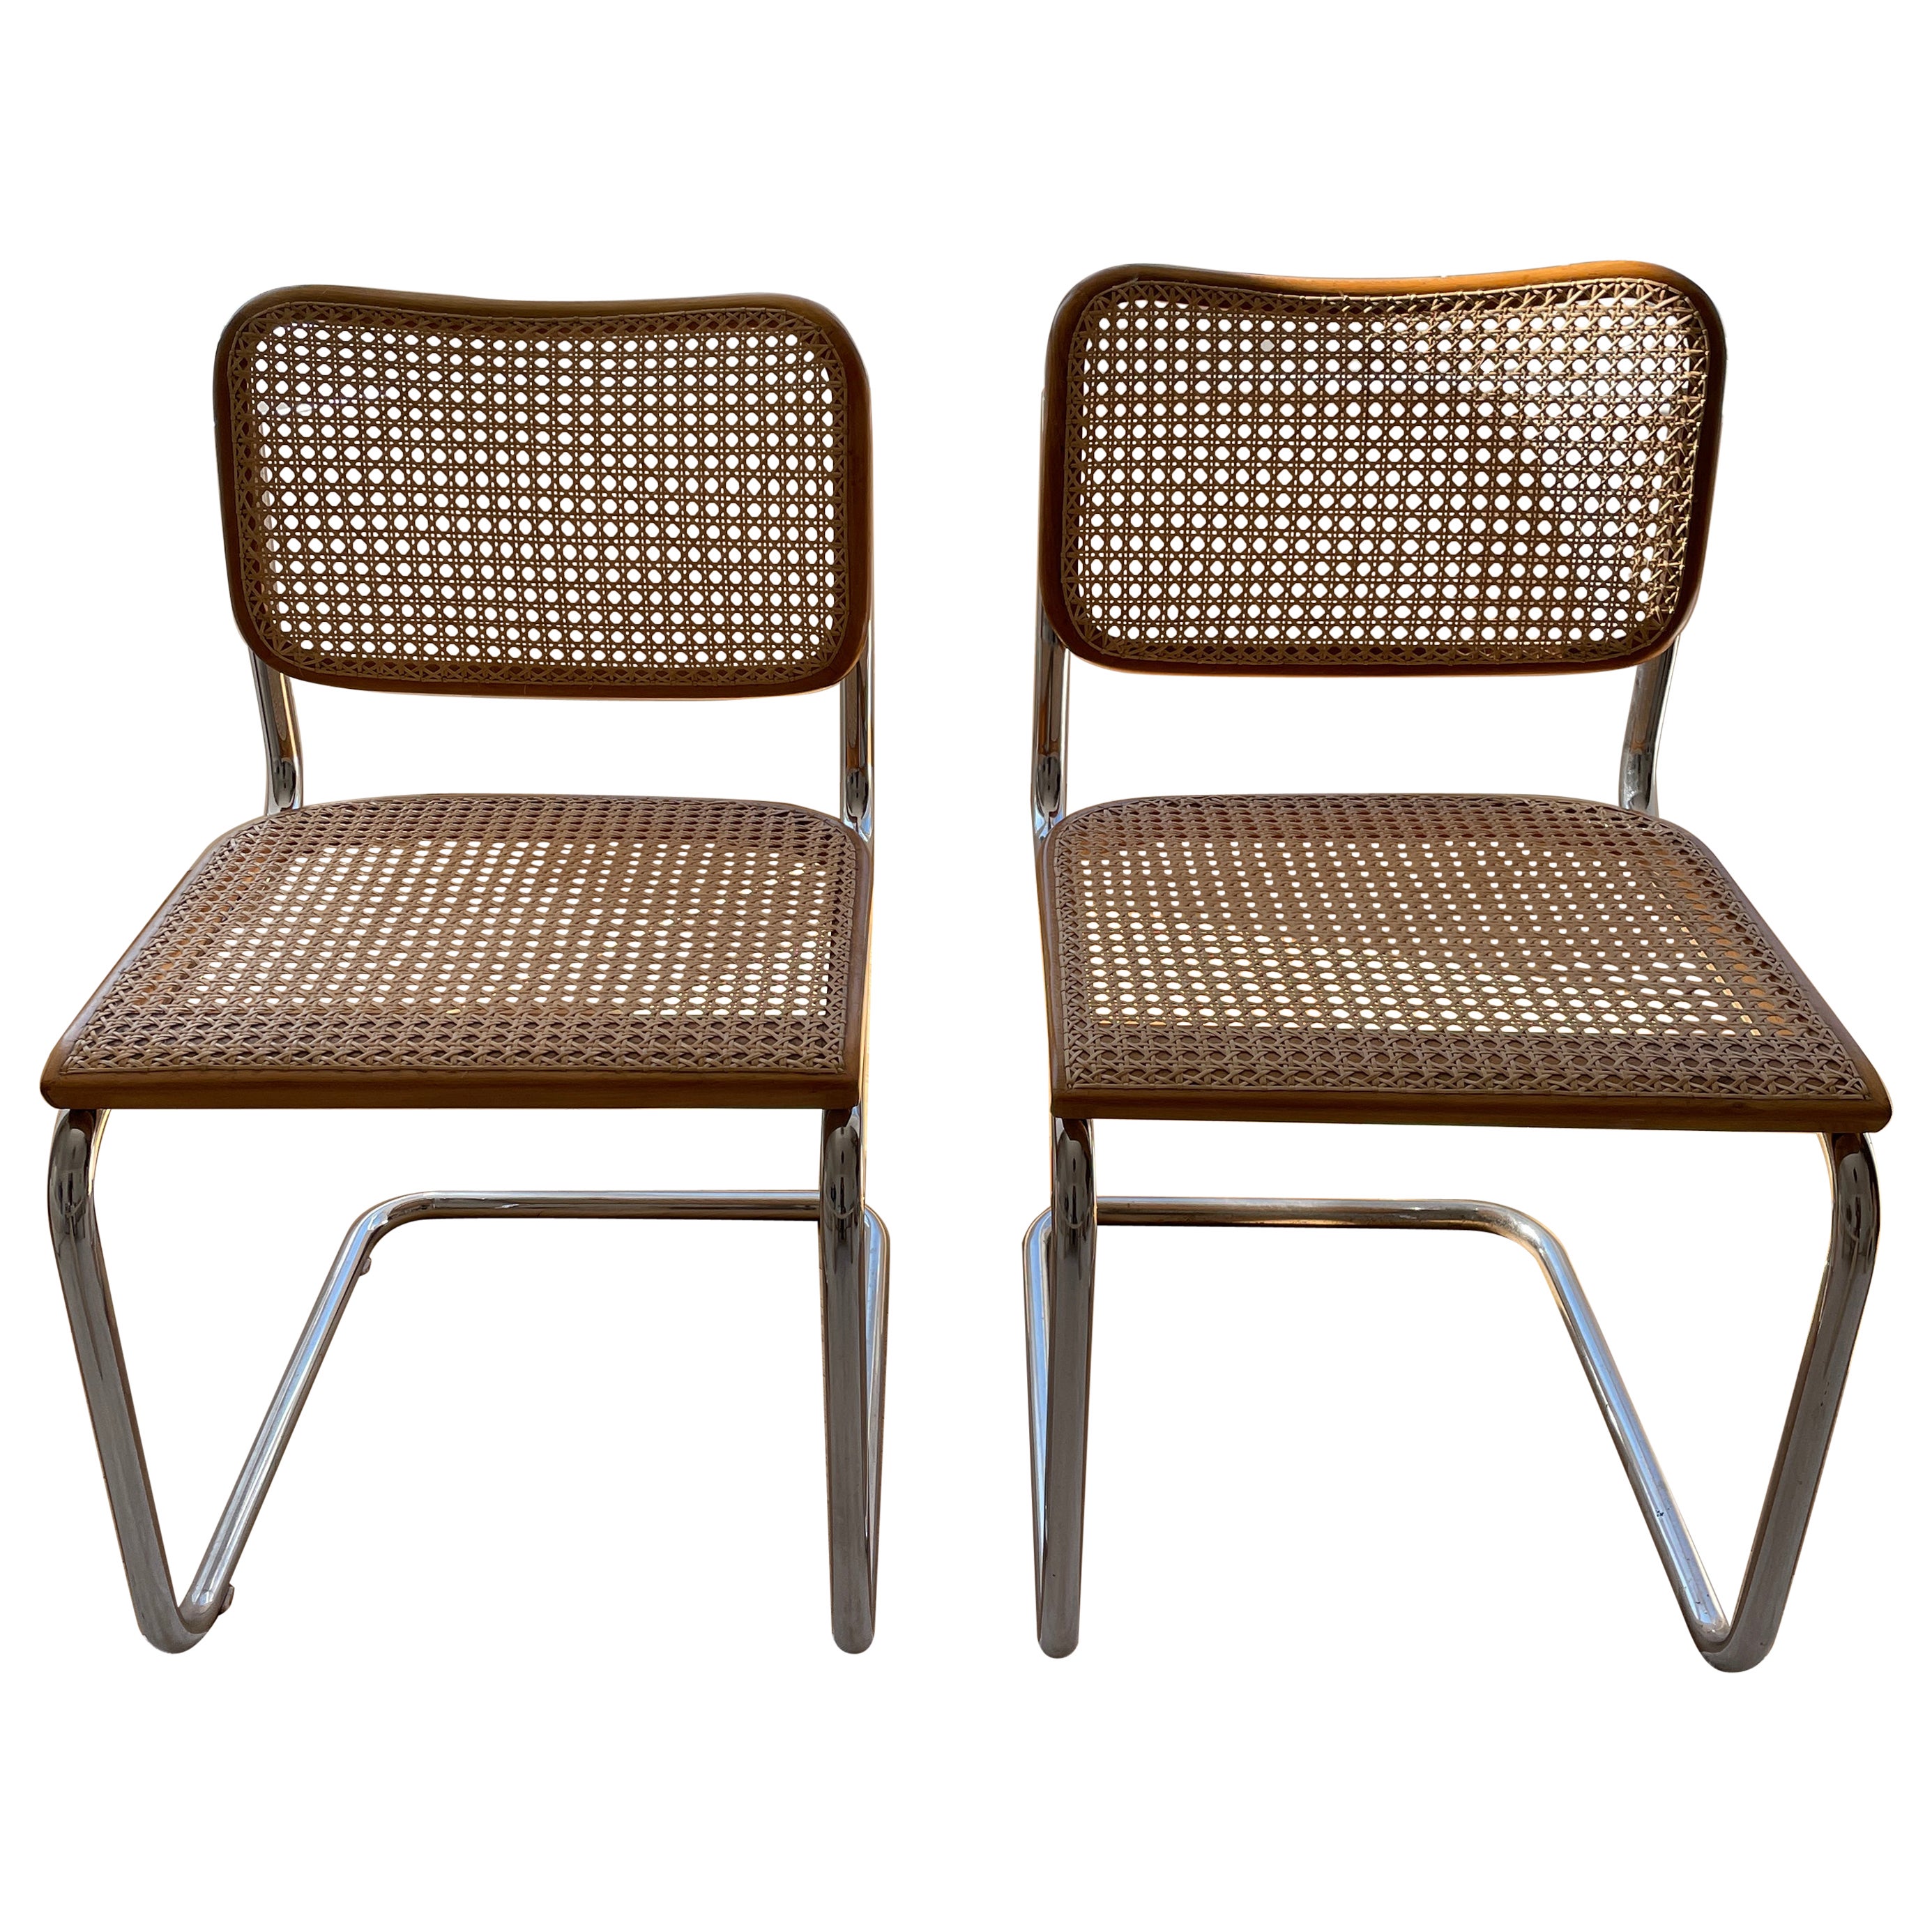 'S32' Cesca Chairs by Marcel Breuer and Gavina